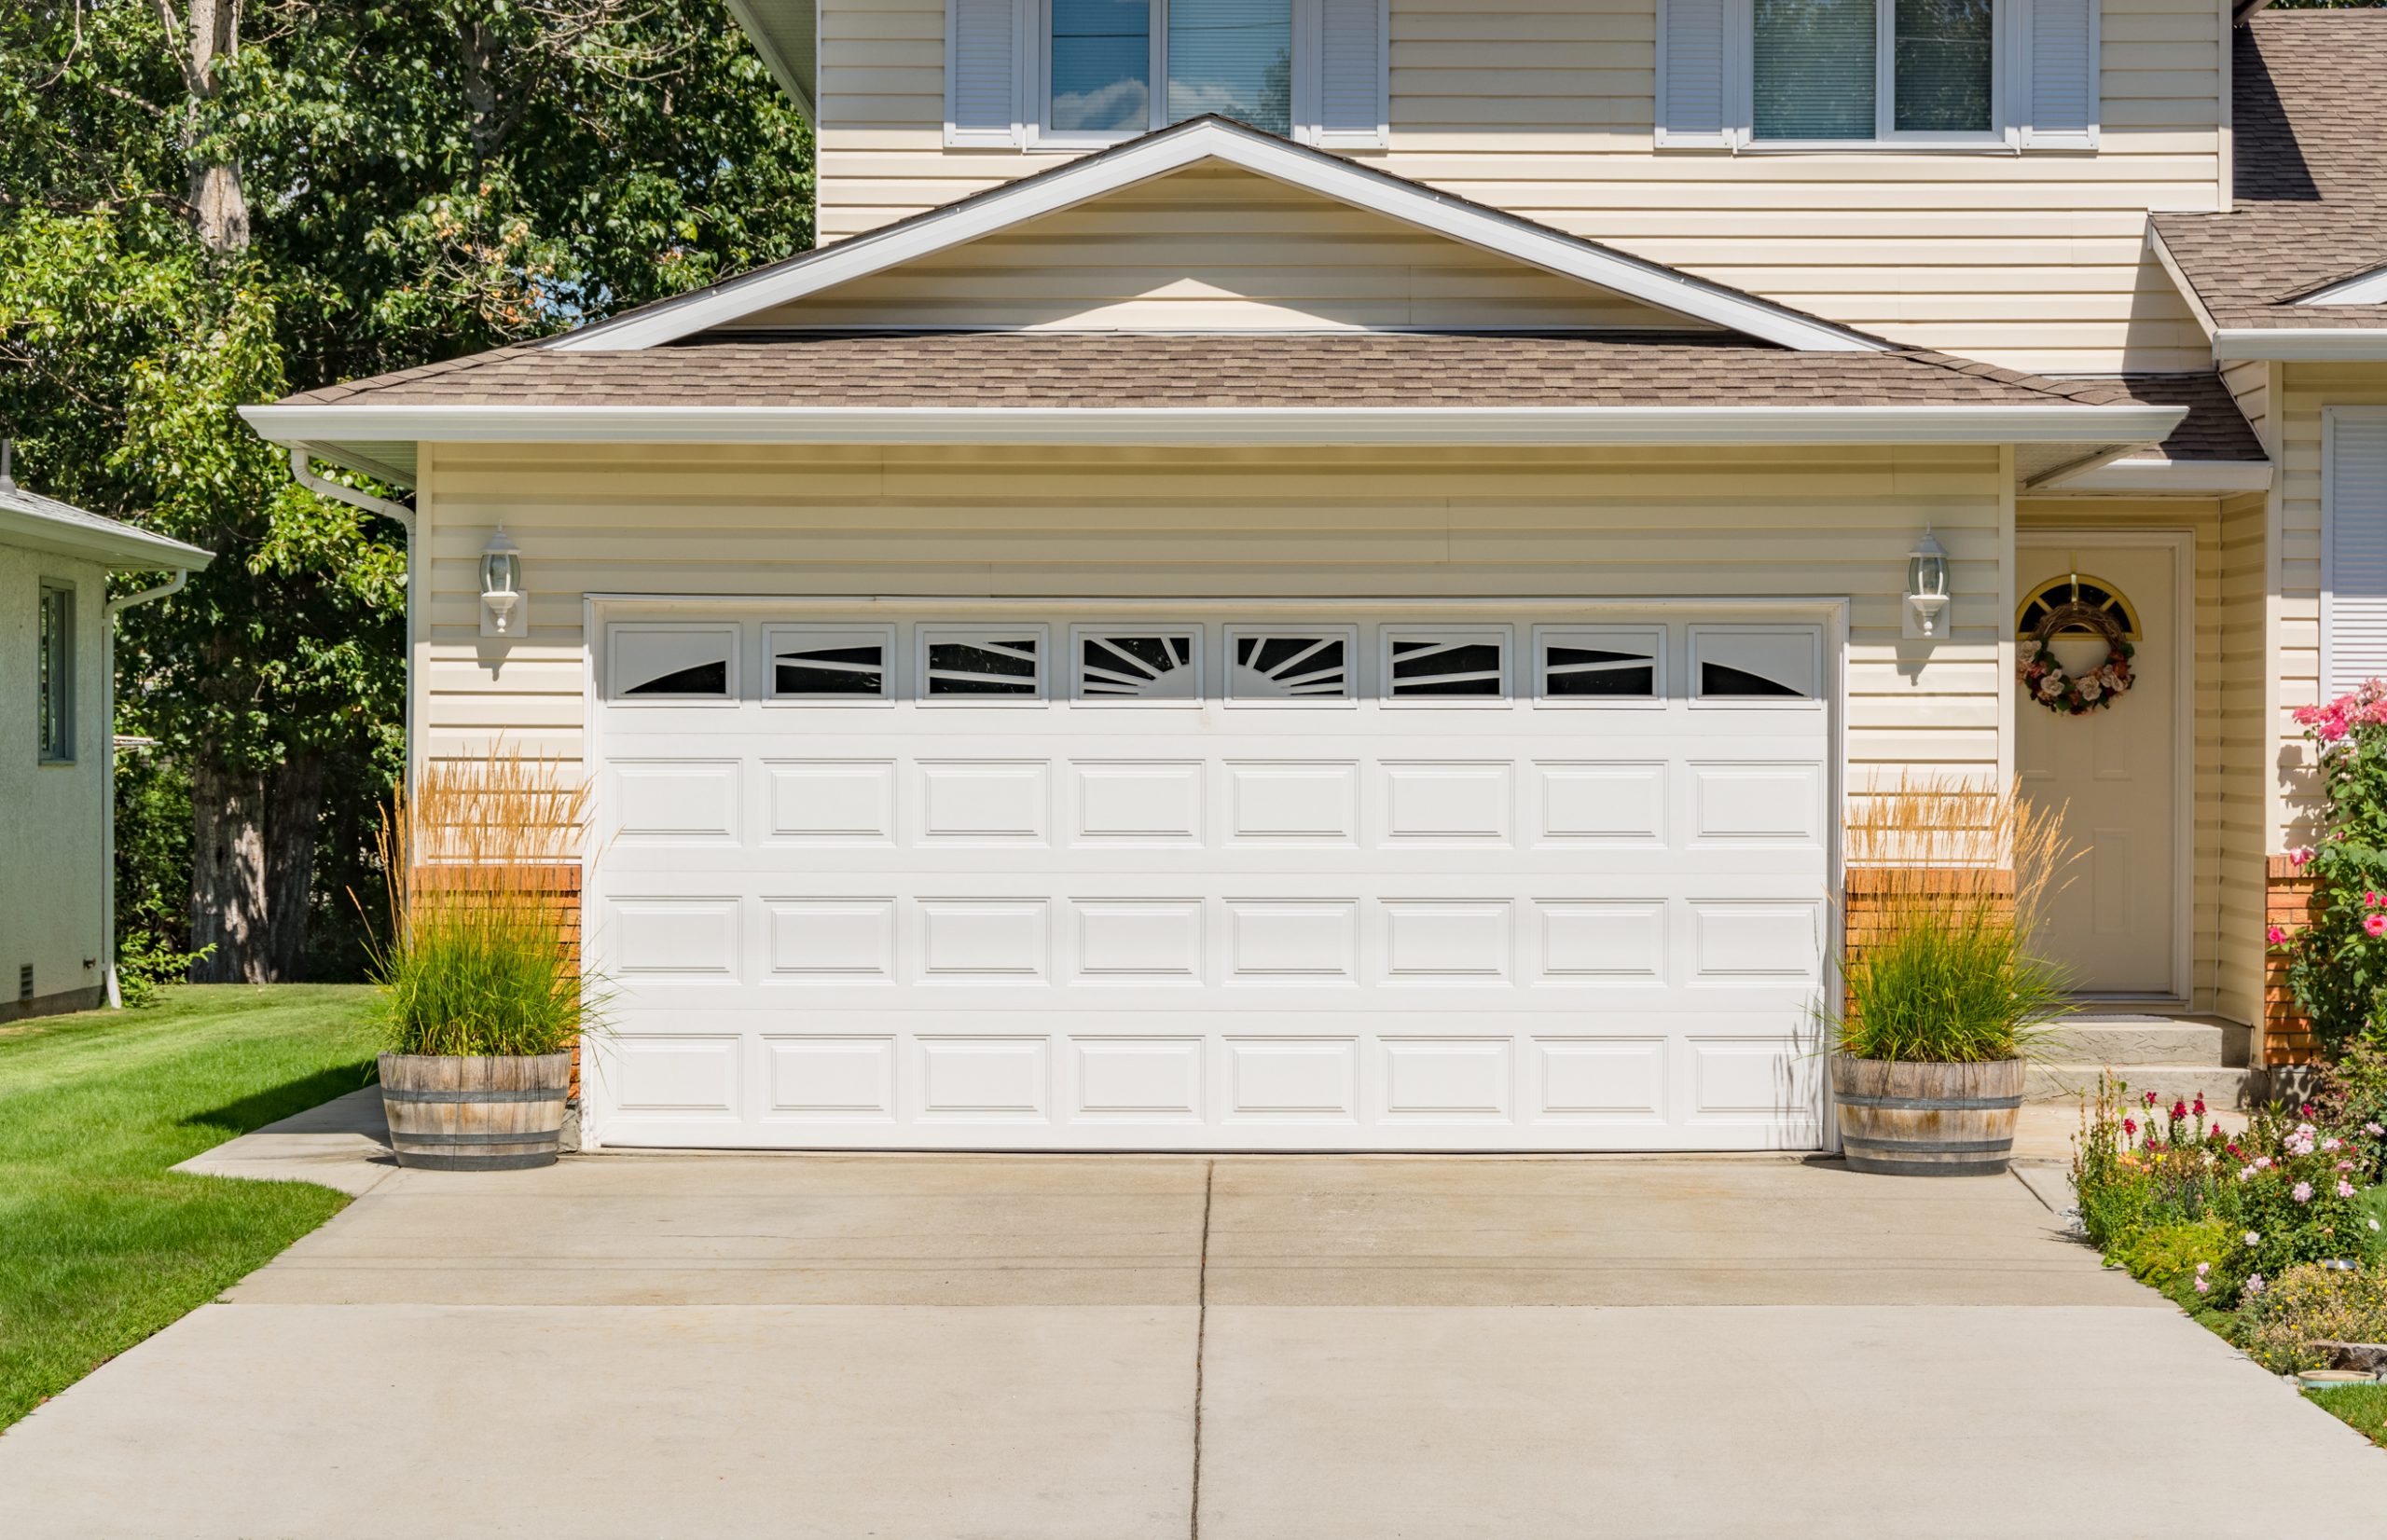 , Carport vs Garage: Which is Better For Car Protection?